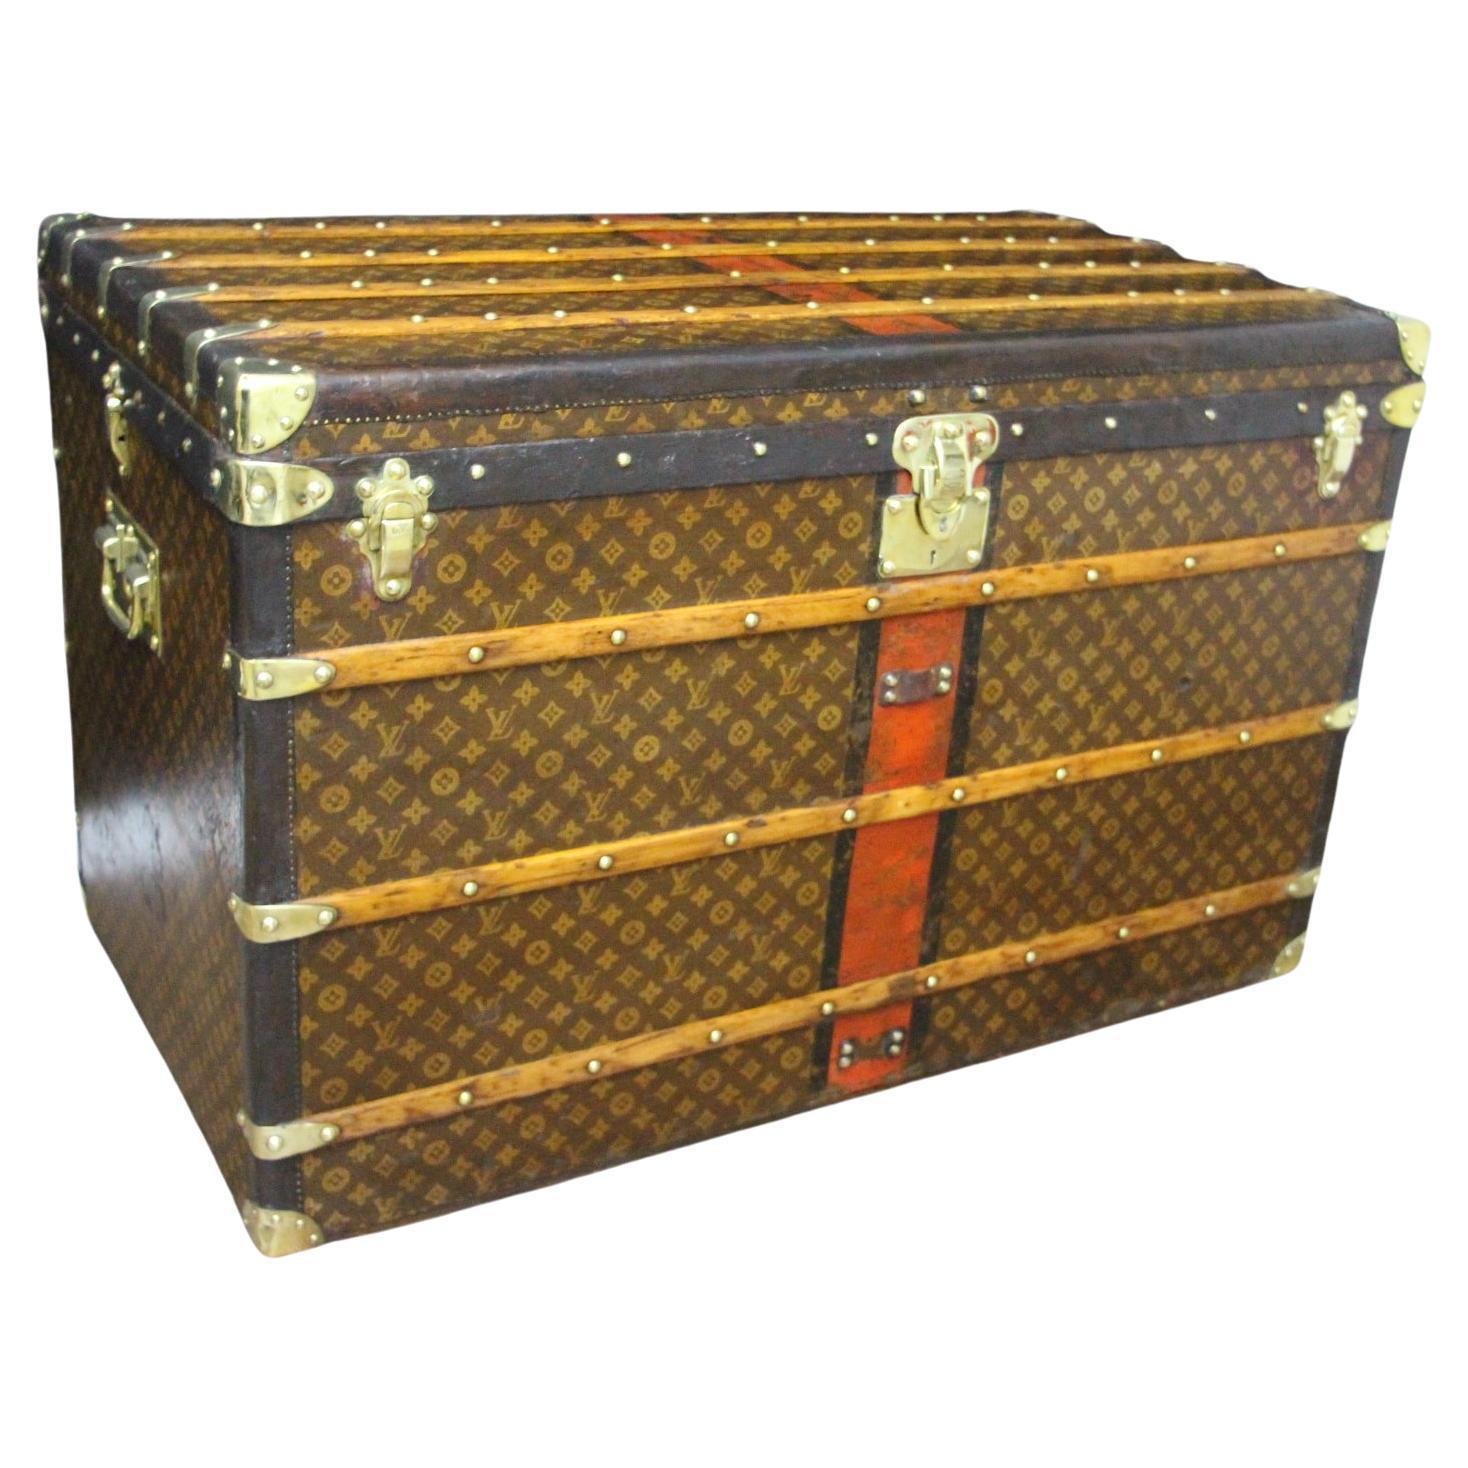 Antique 19thc Louis Vuitton Extra Large Trunk in Woven Canvas Finish ...